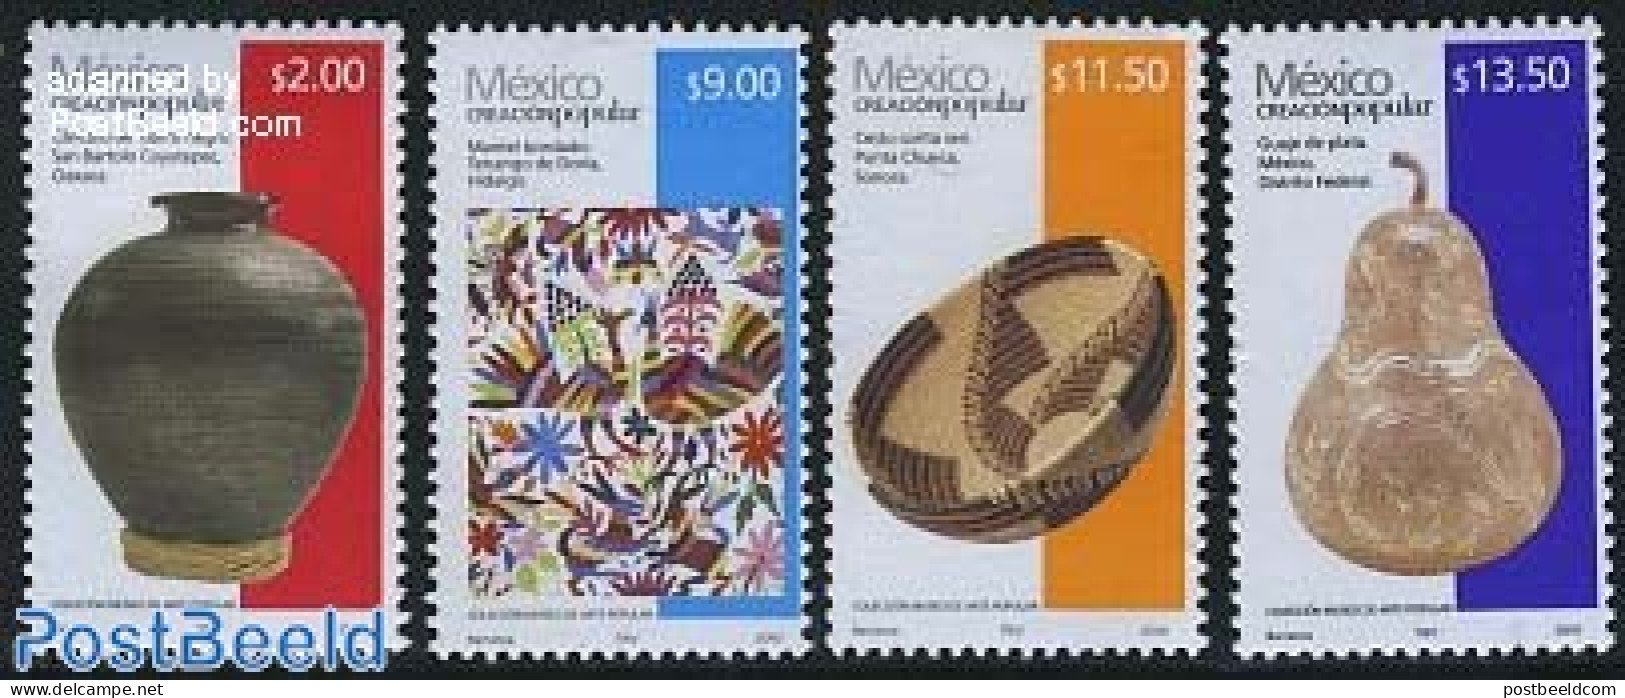 Mexico 2010 Definitives 4v (with Year 2010), Mint NH, Art - Ceramics - Porcelain